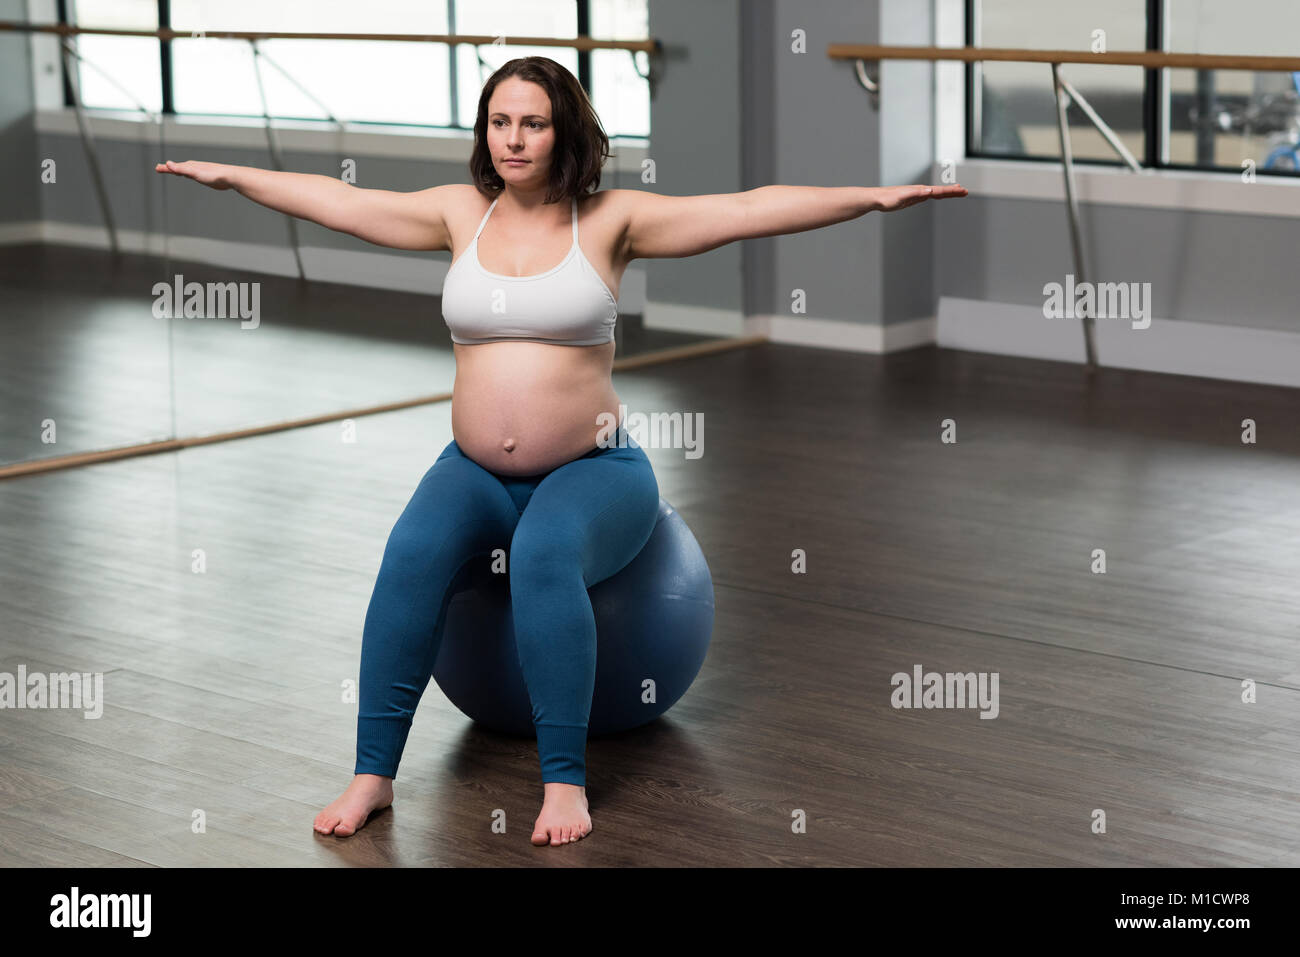 Pregnant woman exercising on exercise ball Banque D'Images